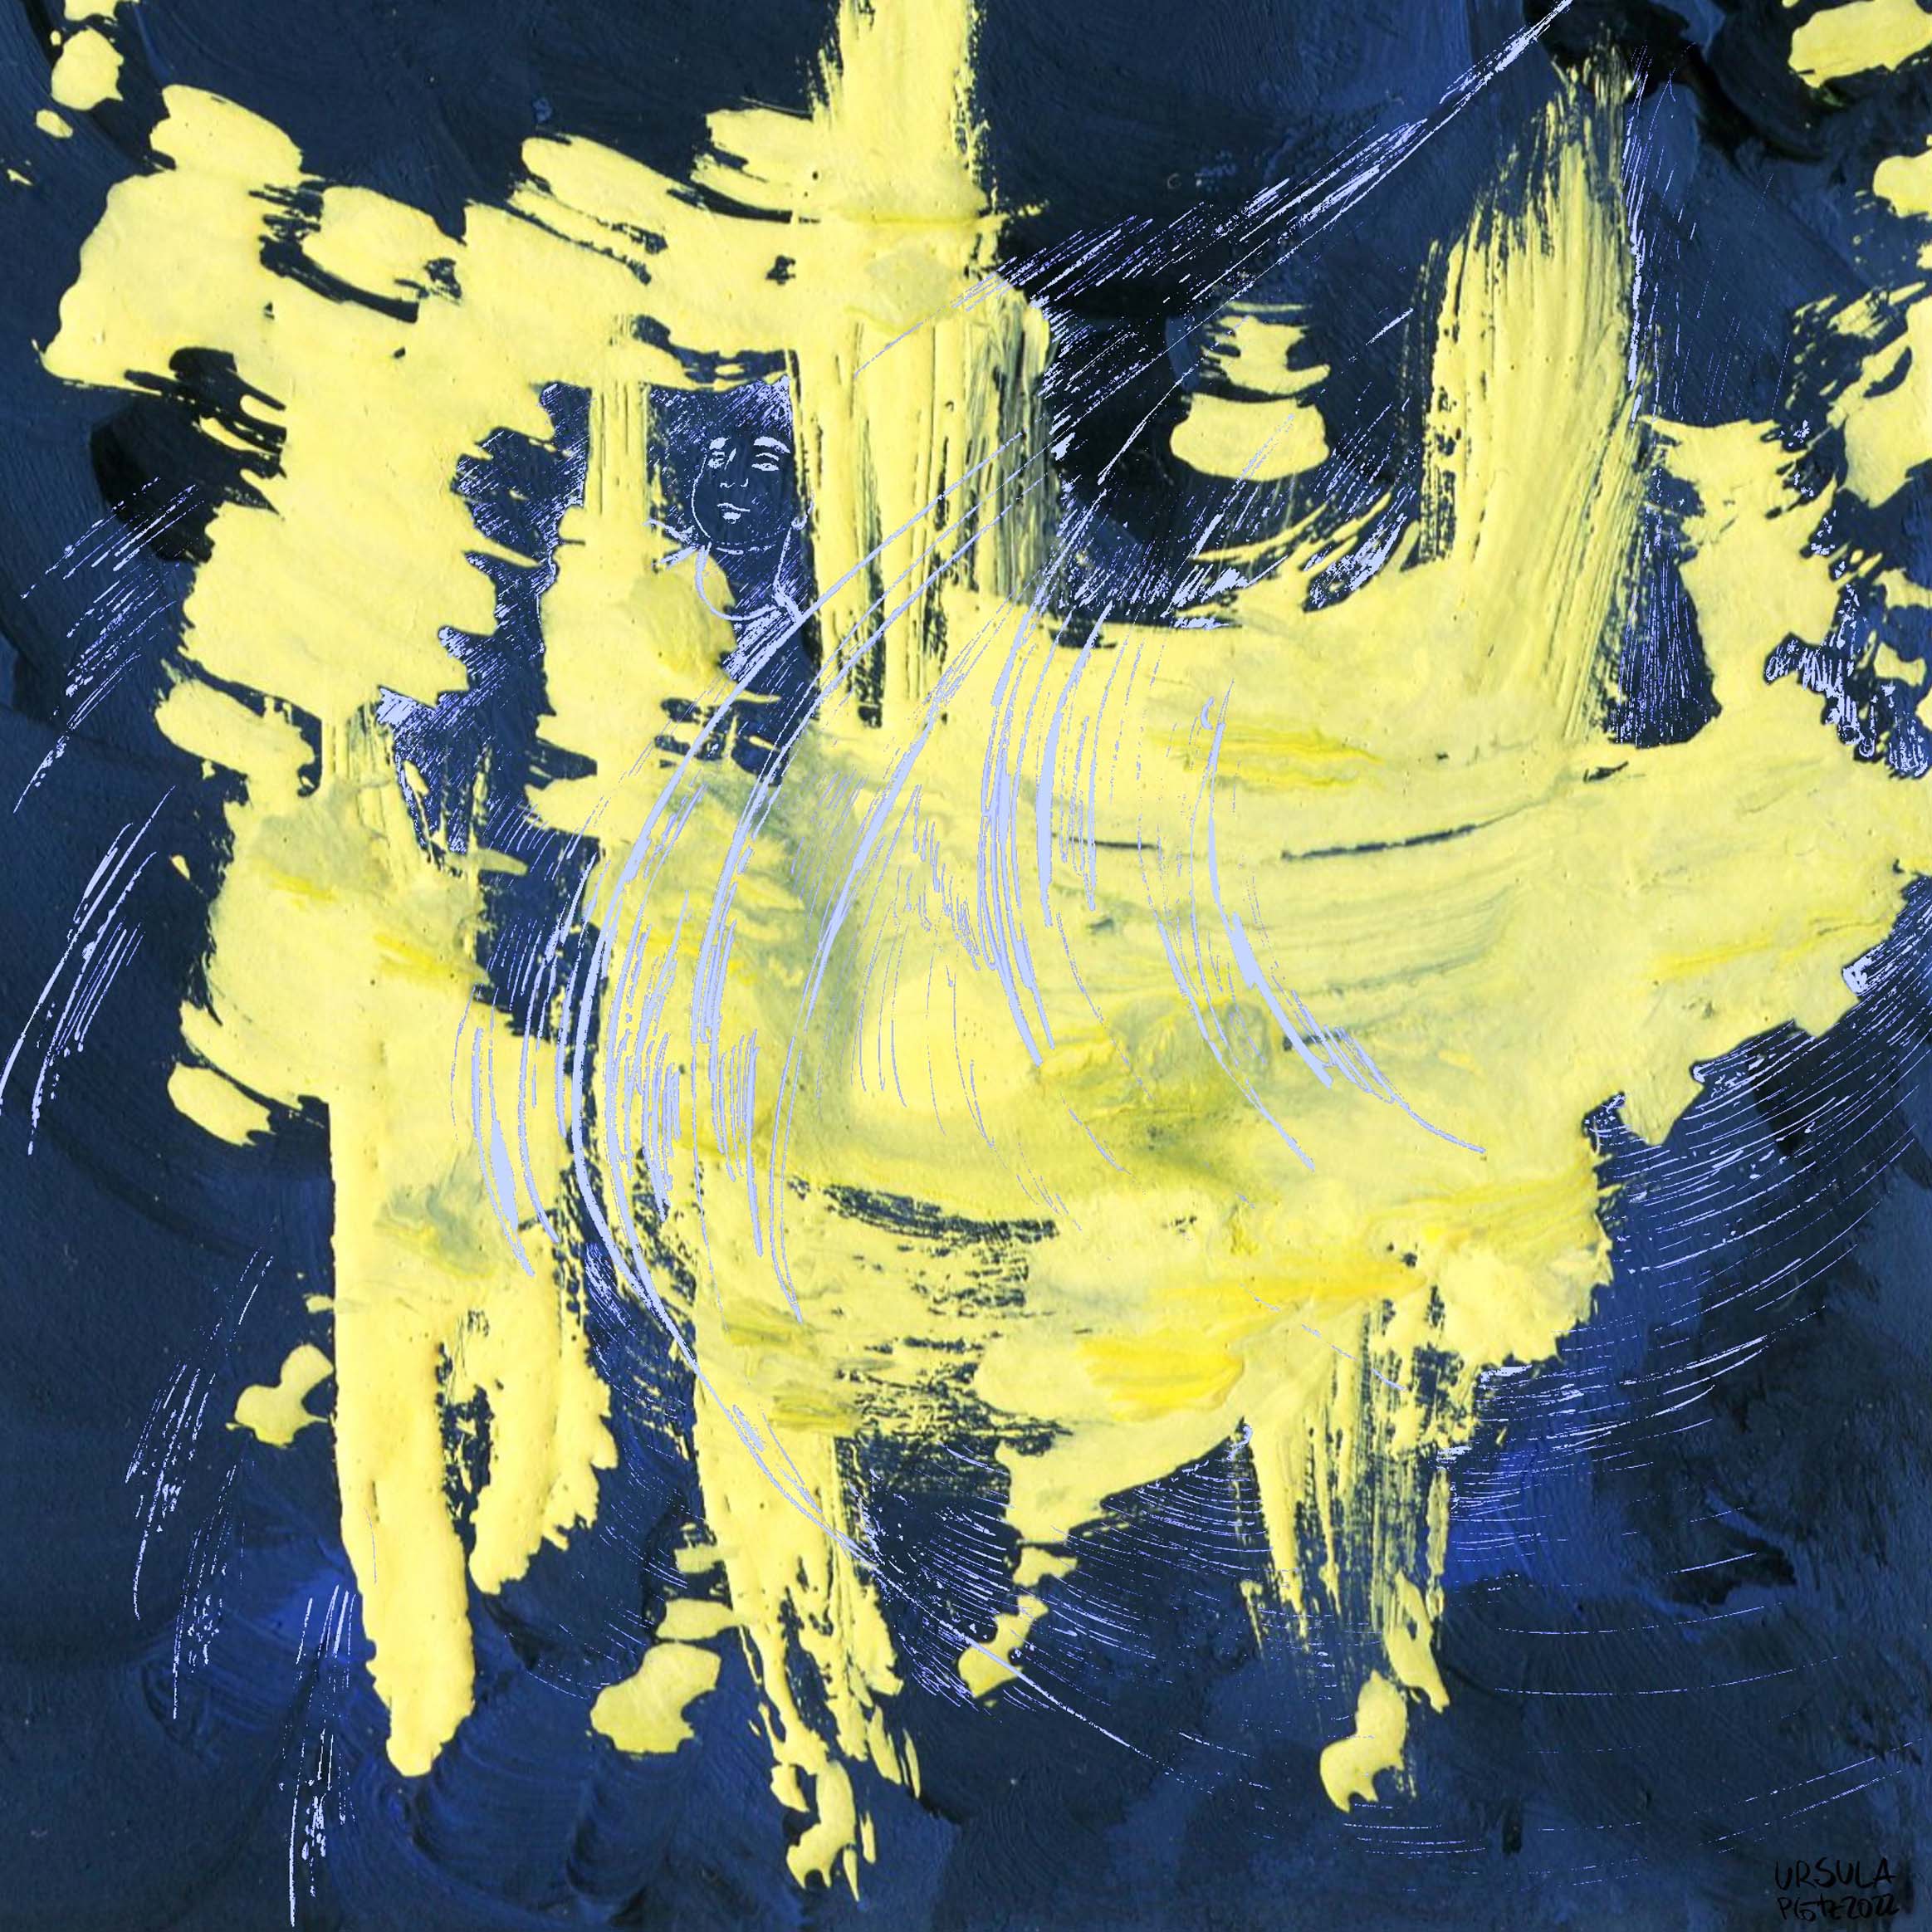 Dark blue background and bright yellow free form (gouache) and light icy blue lines flowing and glowing over it with a smirky face hidden (digitally drawn)